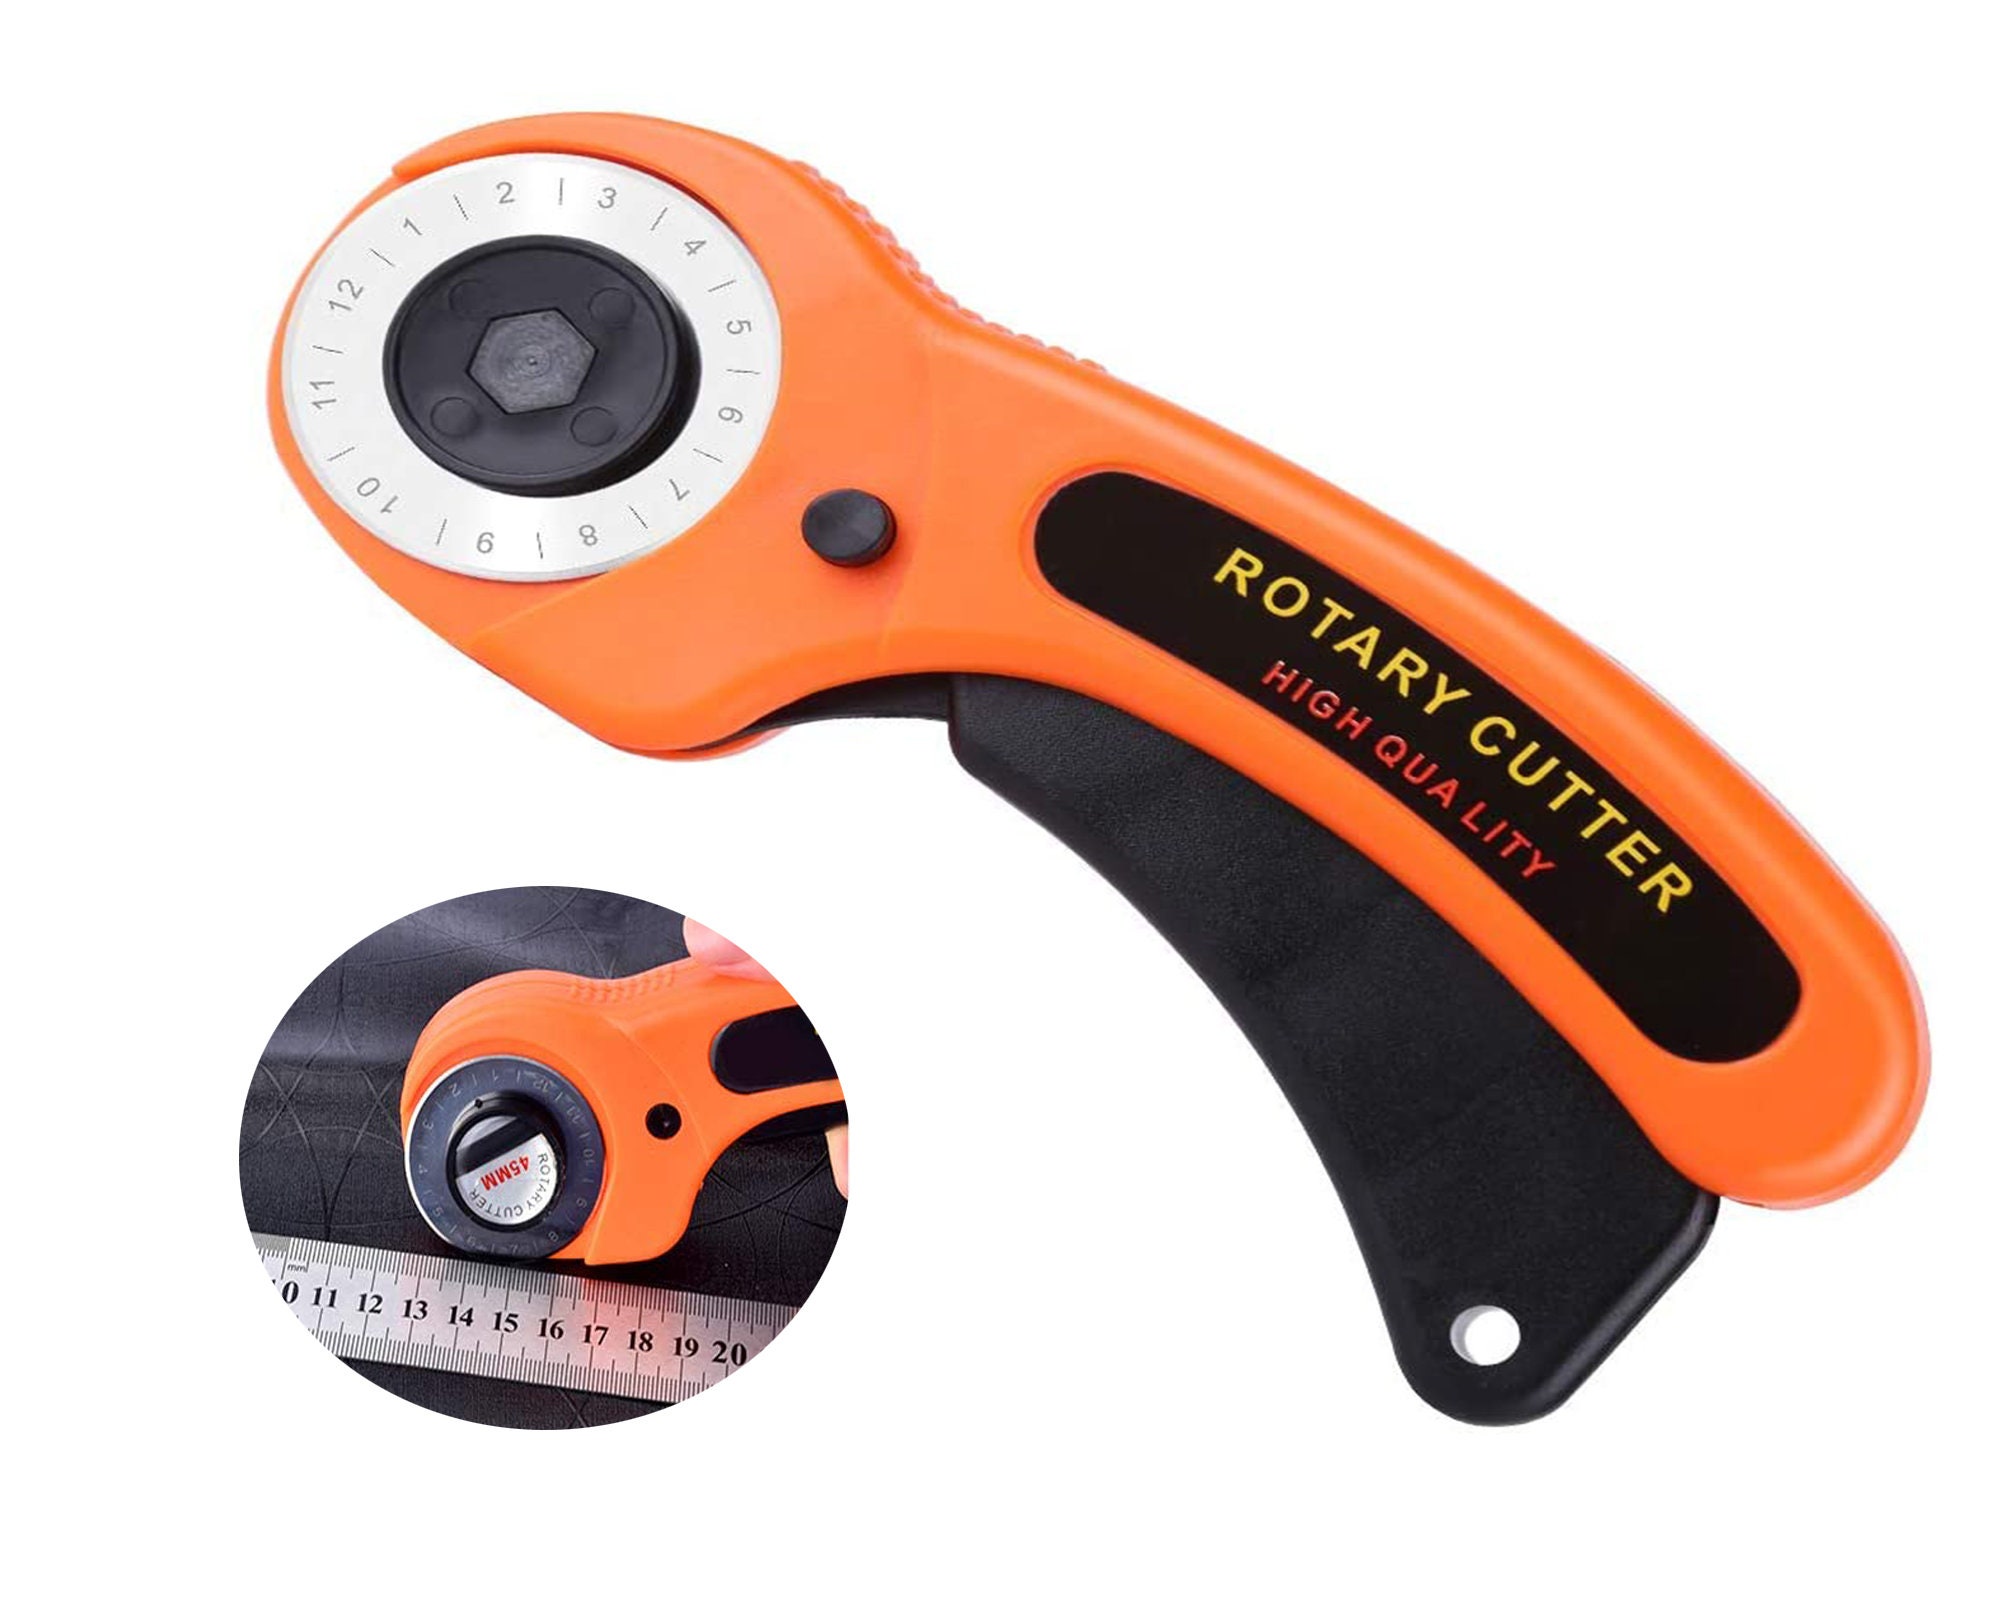 The Grace Company Truecut Straightcut Rotary Cutter With Cutter